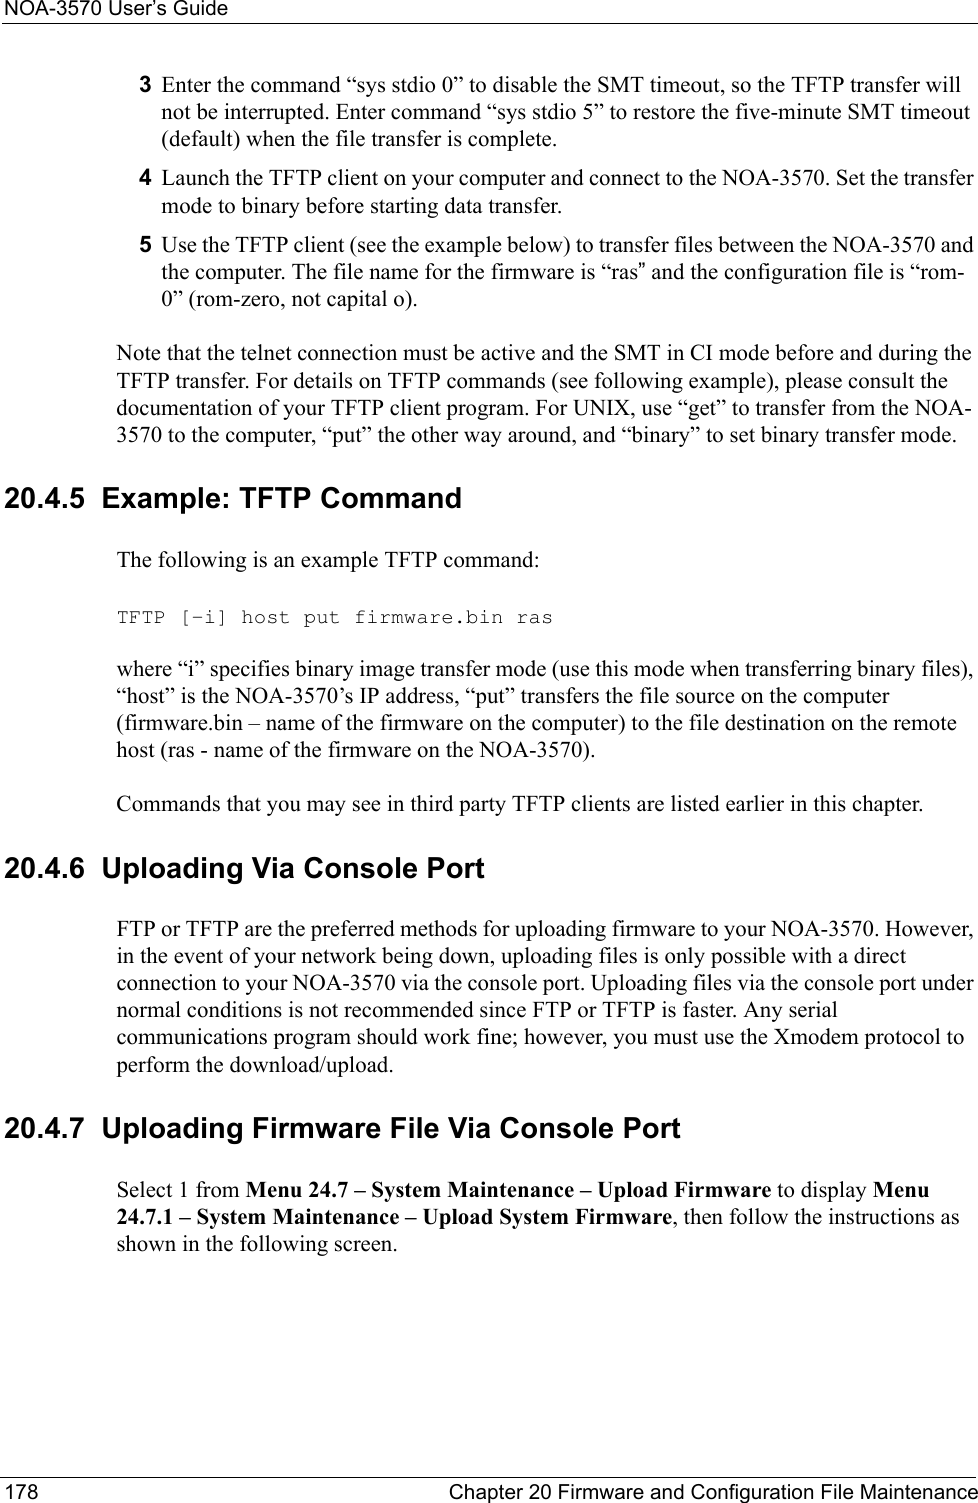 NOA-3570 User’s Guide178 Chapter 20 Firmware and Configuration File Maintenance3Enter the command “sys stdio 0” to disable the SMT timeout, so the TFTP transfer will not be interrupted. Enter command “sys stdio 5” to restore the five-minute SMT timeout (default) when the file transfer is complete.4Launch the TFTP client on your computer and connect to the NOA-3570. Set the transfer mode to binary before starting data transfer.5Use the TFTP client (see the example below) to transfer files between the NOA-3570 and the computer. The file name for the firmware is “ras” and the configuration file is “rom-0” (rom-zero, not capital o).Note that the telnet connection must be active and the SMT in CI mode before and during the TFTP transfer. For details on TFTP commands (see following example), please consult the documentation of your TFTP client program. For UNIX, use “get” to transfer from the NOA-3570 to the computer, “put” the other way around, and “binary” to set binary transfer mode.20.4.5  Example: TFTP CommandThe following is an example TFTP command:TFTP [-i] host put firmware.bin raswhere “i” specifies binary image transfer mode (use this mode when transferring binary files), “host” is the NOA-3570’s IP address, “put” transfers the file source on the computer (firmware.bin – name of the firmware on the computer) to the file destination on the remote host (ras - name of the firmware on the NOA-3570).Commands that you may see in third party TFTP clients are listed earlier in this chapter.20.4.6  Uploading Via Console Port FTP or TFTP are the preferred methods for uploading firmware to your NOA-3570. However, in the event of your network being down, uploading files is only possible with a direct connection to your NOA-3570 via the console port. Uploading files via the console port under normal conditions is not recommended since FTP or TFTP is faster. Any serial communications program should work fine; however, you must use the Xmodem protocol to perform the download/upload.20.4.7  Uploading Firmware File Via Console Port Select 1 from Menu 24.7 – System Maintenance – Upload Firmware to display Menu 24.7.1 – System Maintenance – Upload System Firmware, then follow the instructions as shown in the following screen.